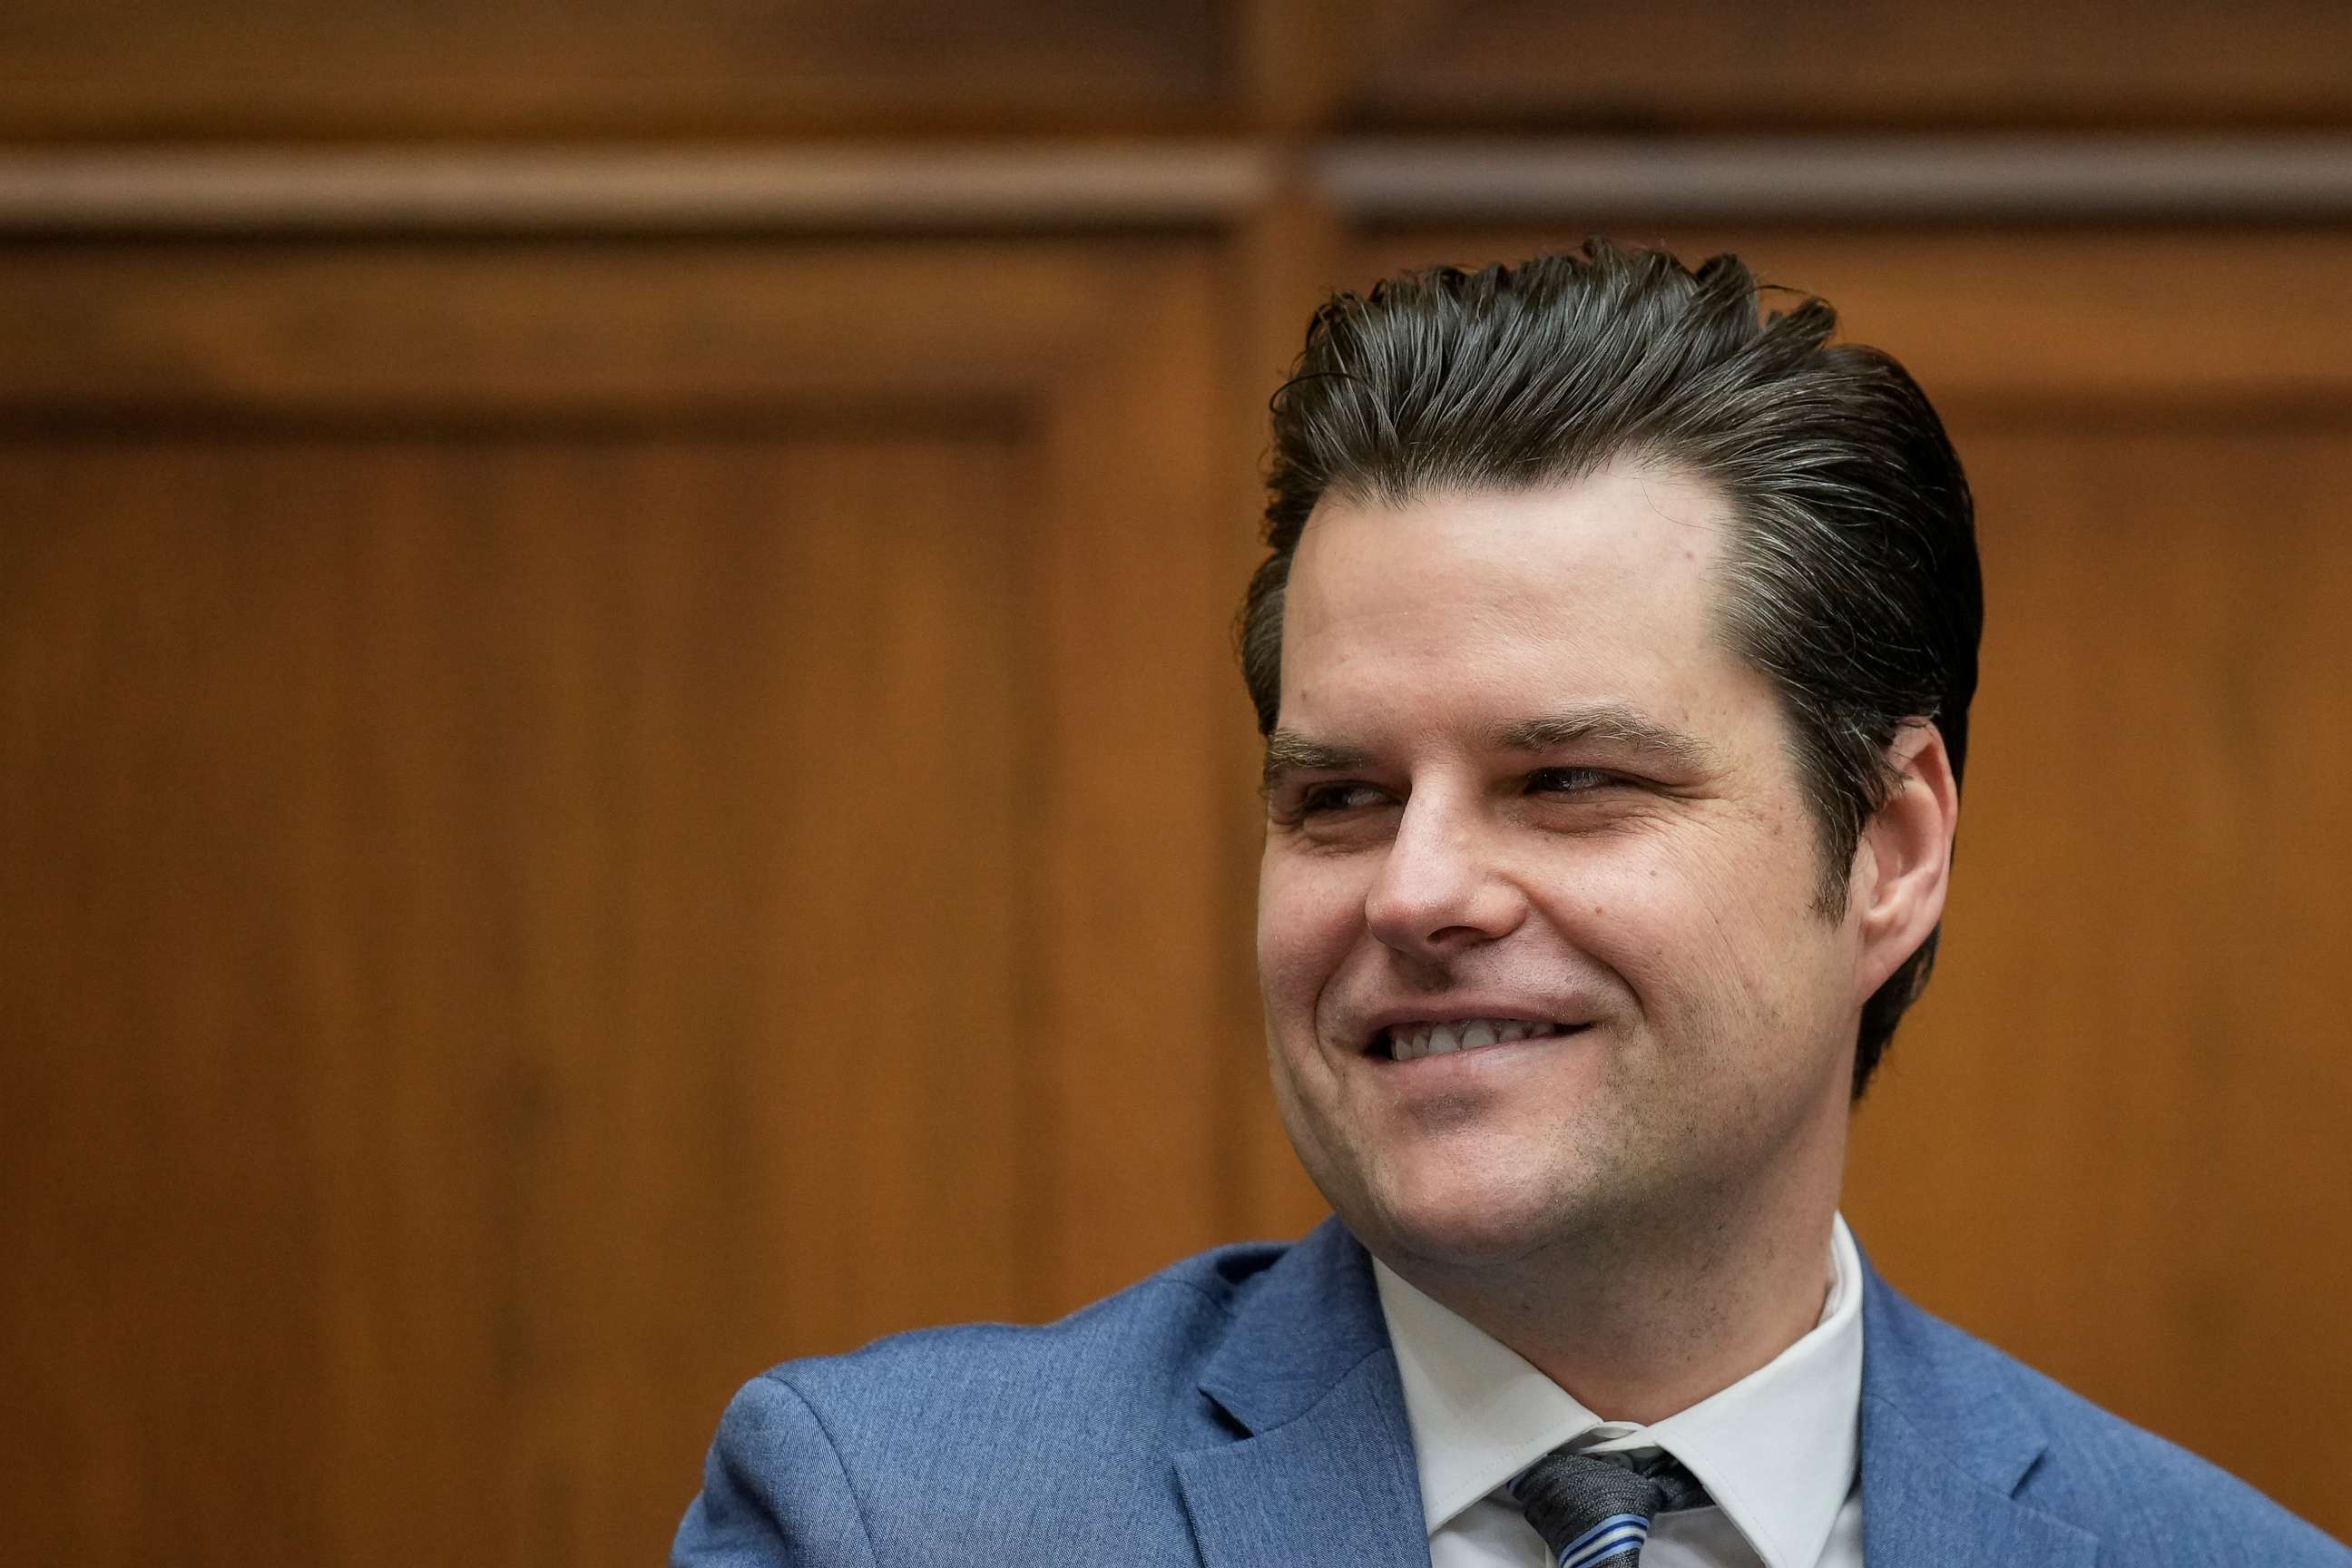 PHOTO: U.S. Rep. Matt Gaetz, R-Fla., speaks during a business meeting prior to a hearing on U.S. southern border security on Capitol Hill, Feb. 1, 2023, in Washington, D.C.